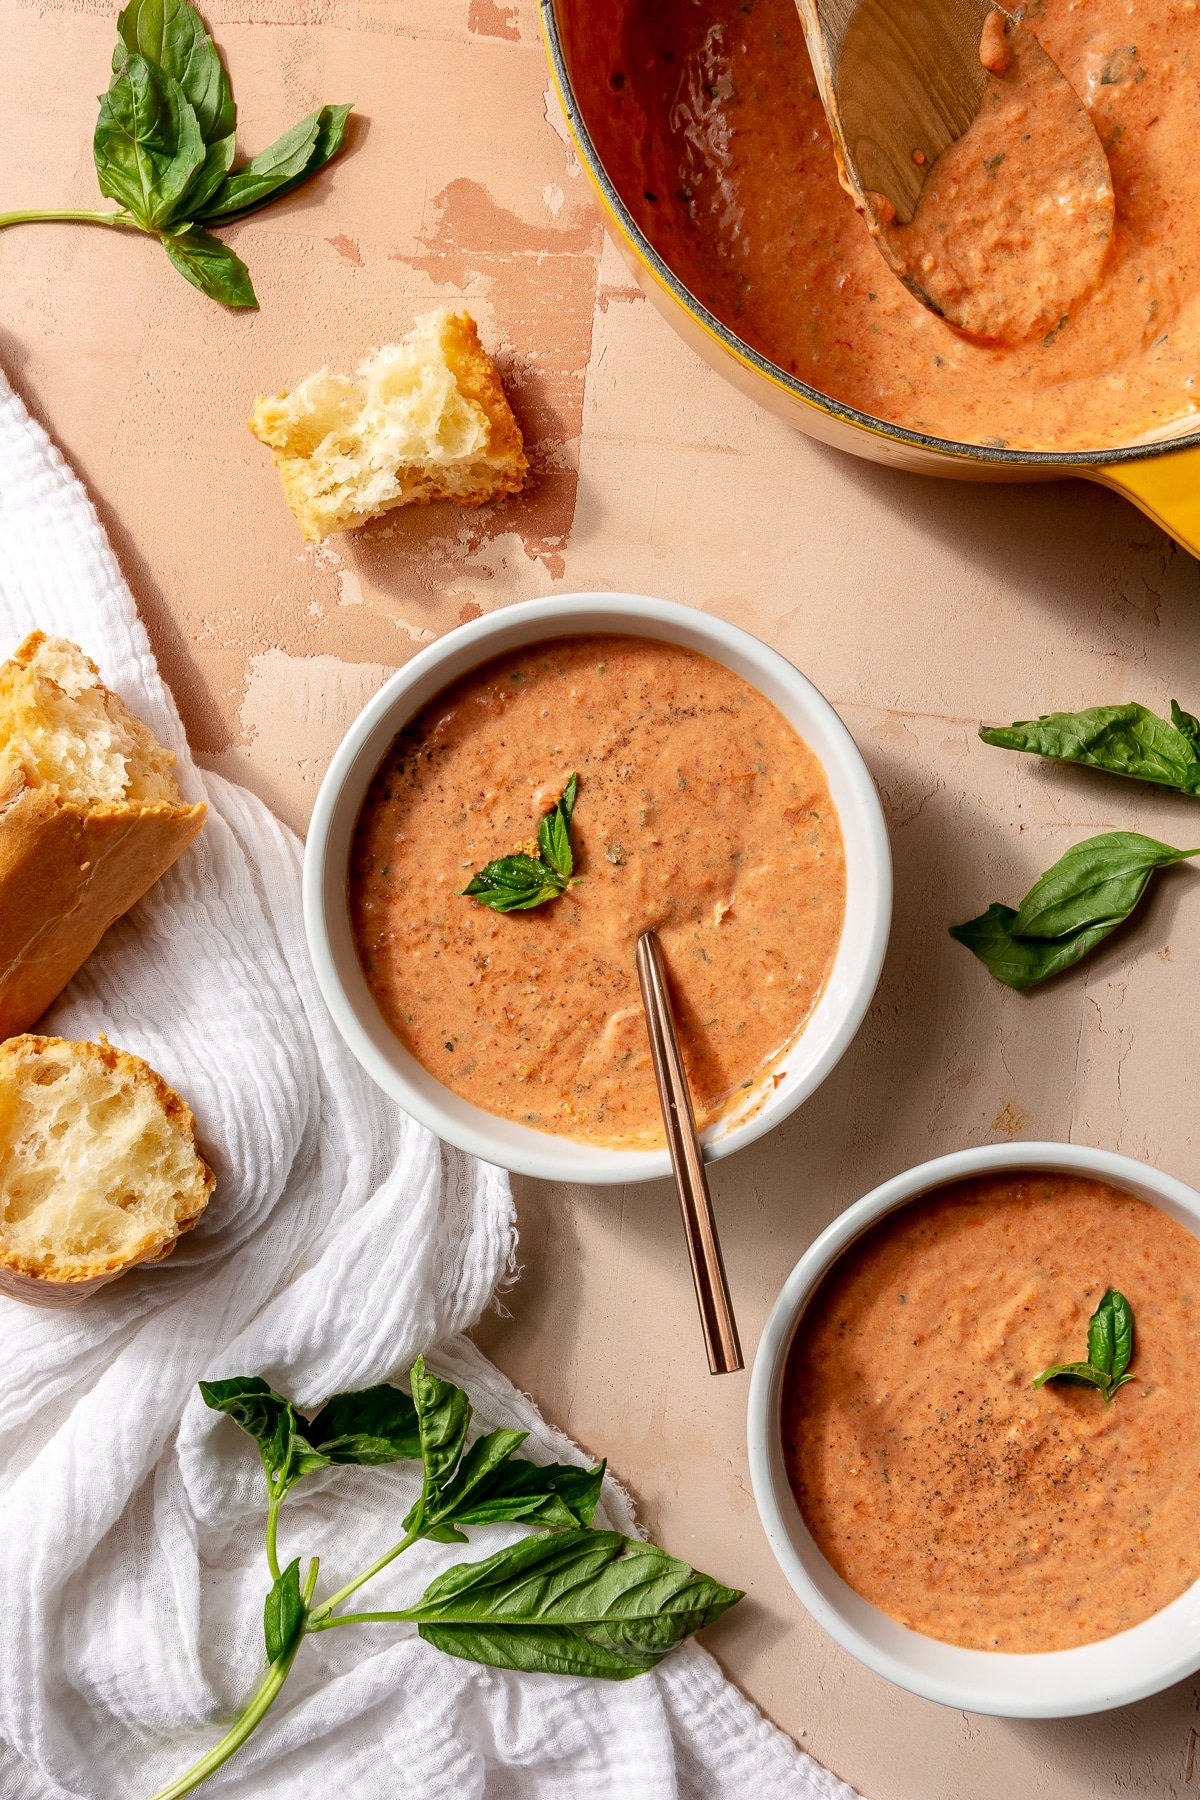 Tomato soup has been served in two white bowls. They each have been toped with basil. A toasted baguette sits to the side.